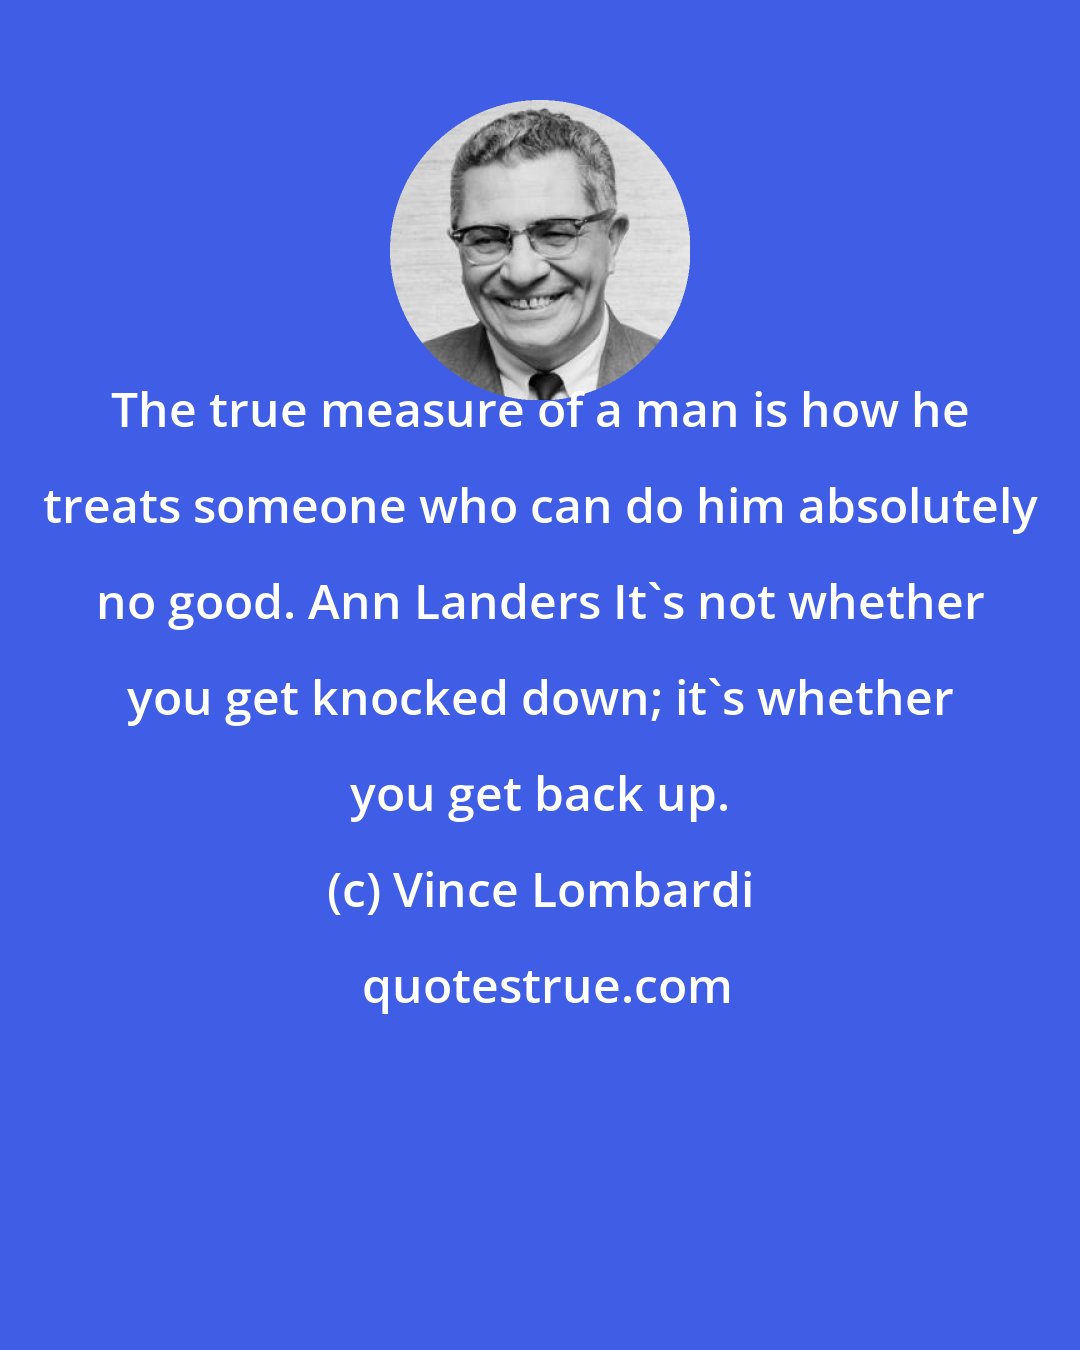 Vince Lombardi: The true measure of a man is how he treats someone who can do him absolutely no good. Ann Landers It's not whether you get knocked down; it's whether you get back up.